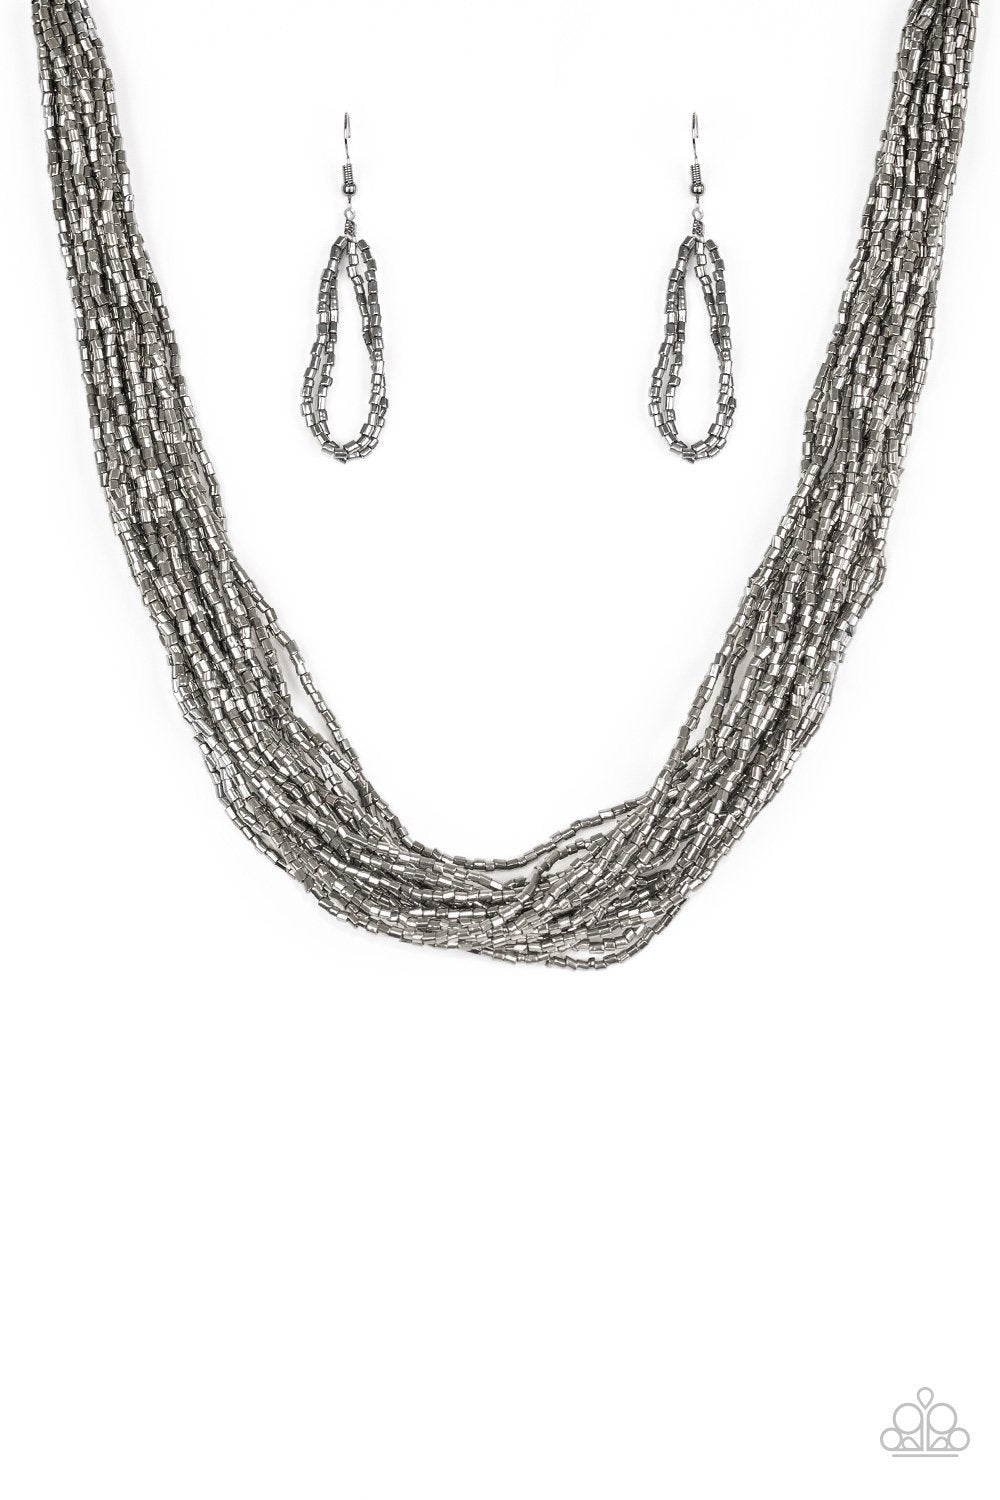 The Speed Of Starlight Gunmetal Seed Bead Necklace and matching Earrings - Paparazzi Accessories-CarasShop.com - $5 Jewelry by Cara Jewels